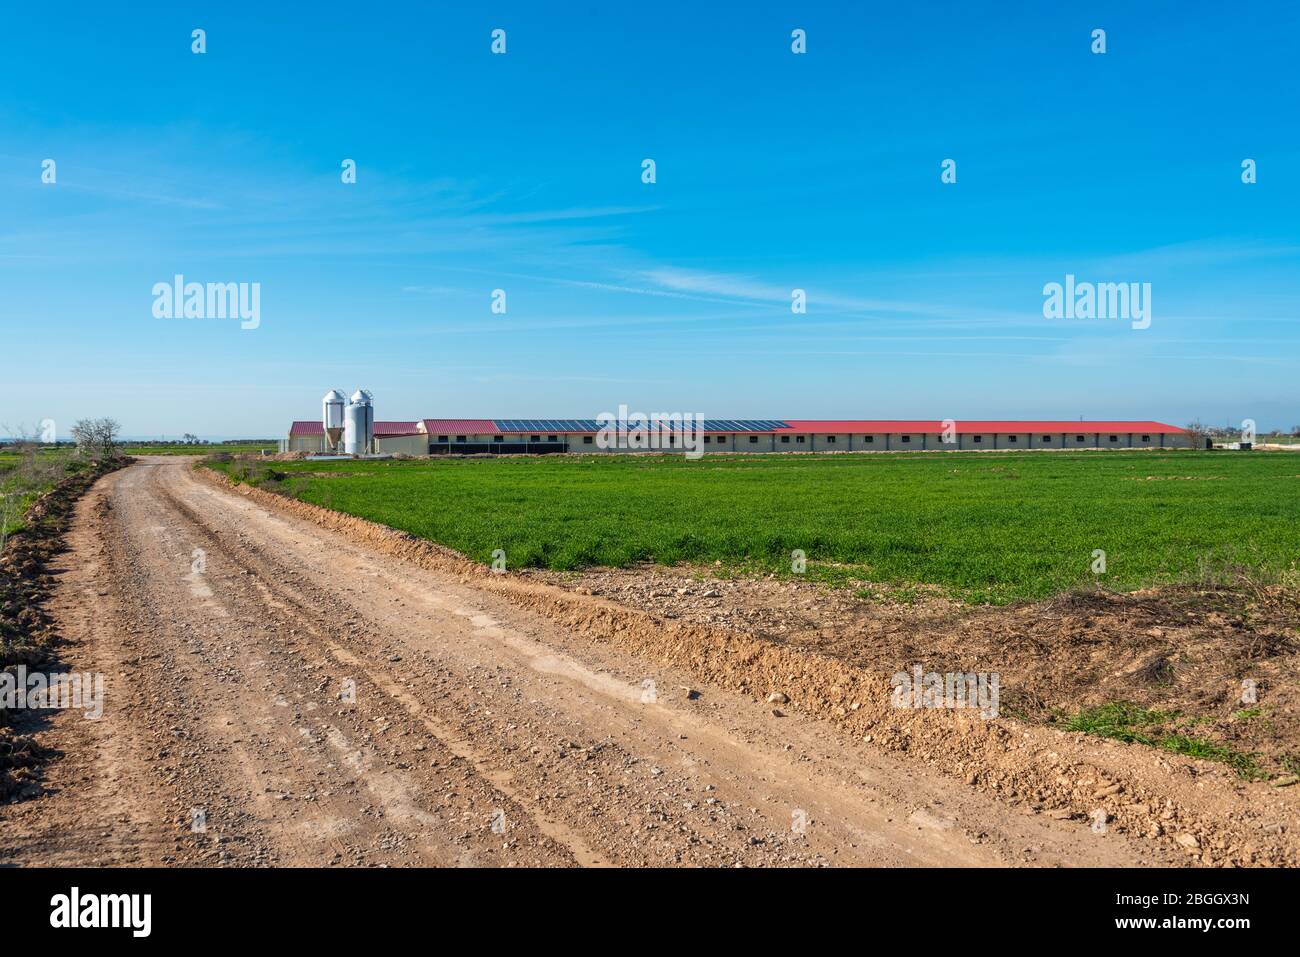 February 19, 2020 - Belianes-Preixana, Spain. An industry scale farm building with solar panels on the roof, in the plains of Belianes-Preixana. Stock Photo